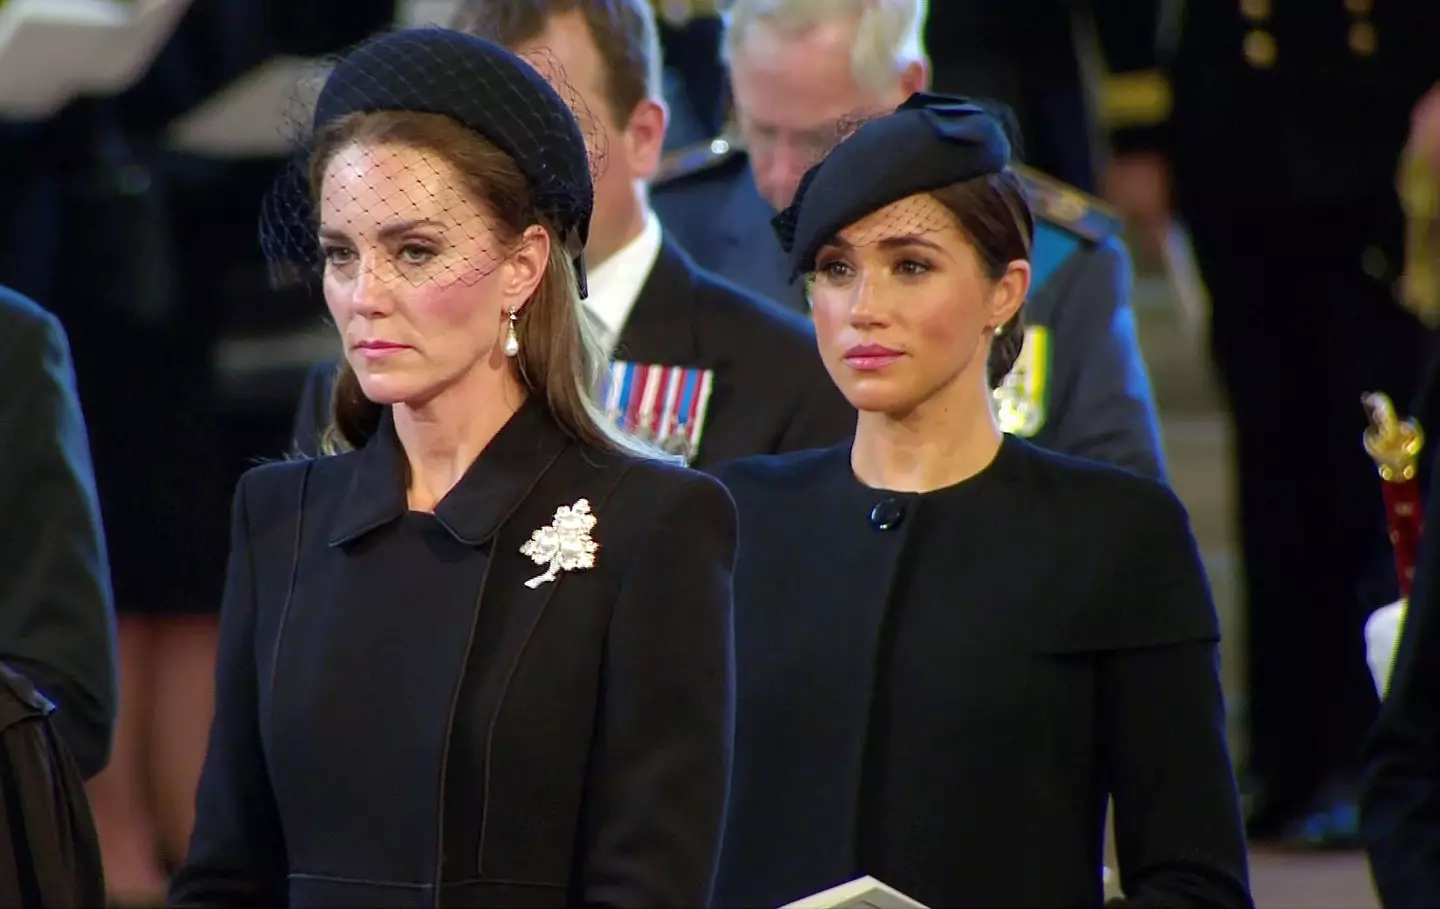 Meghan Markle and Kate Middleton were seen getting emotional at the Queen's coffin procession last week.